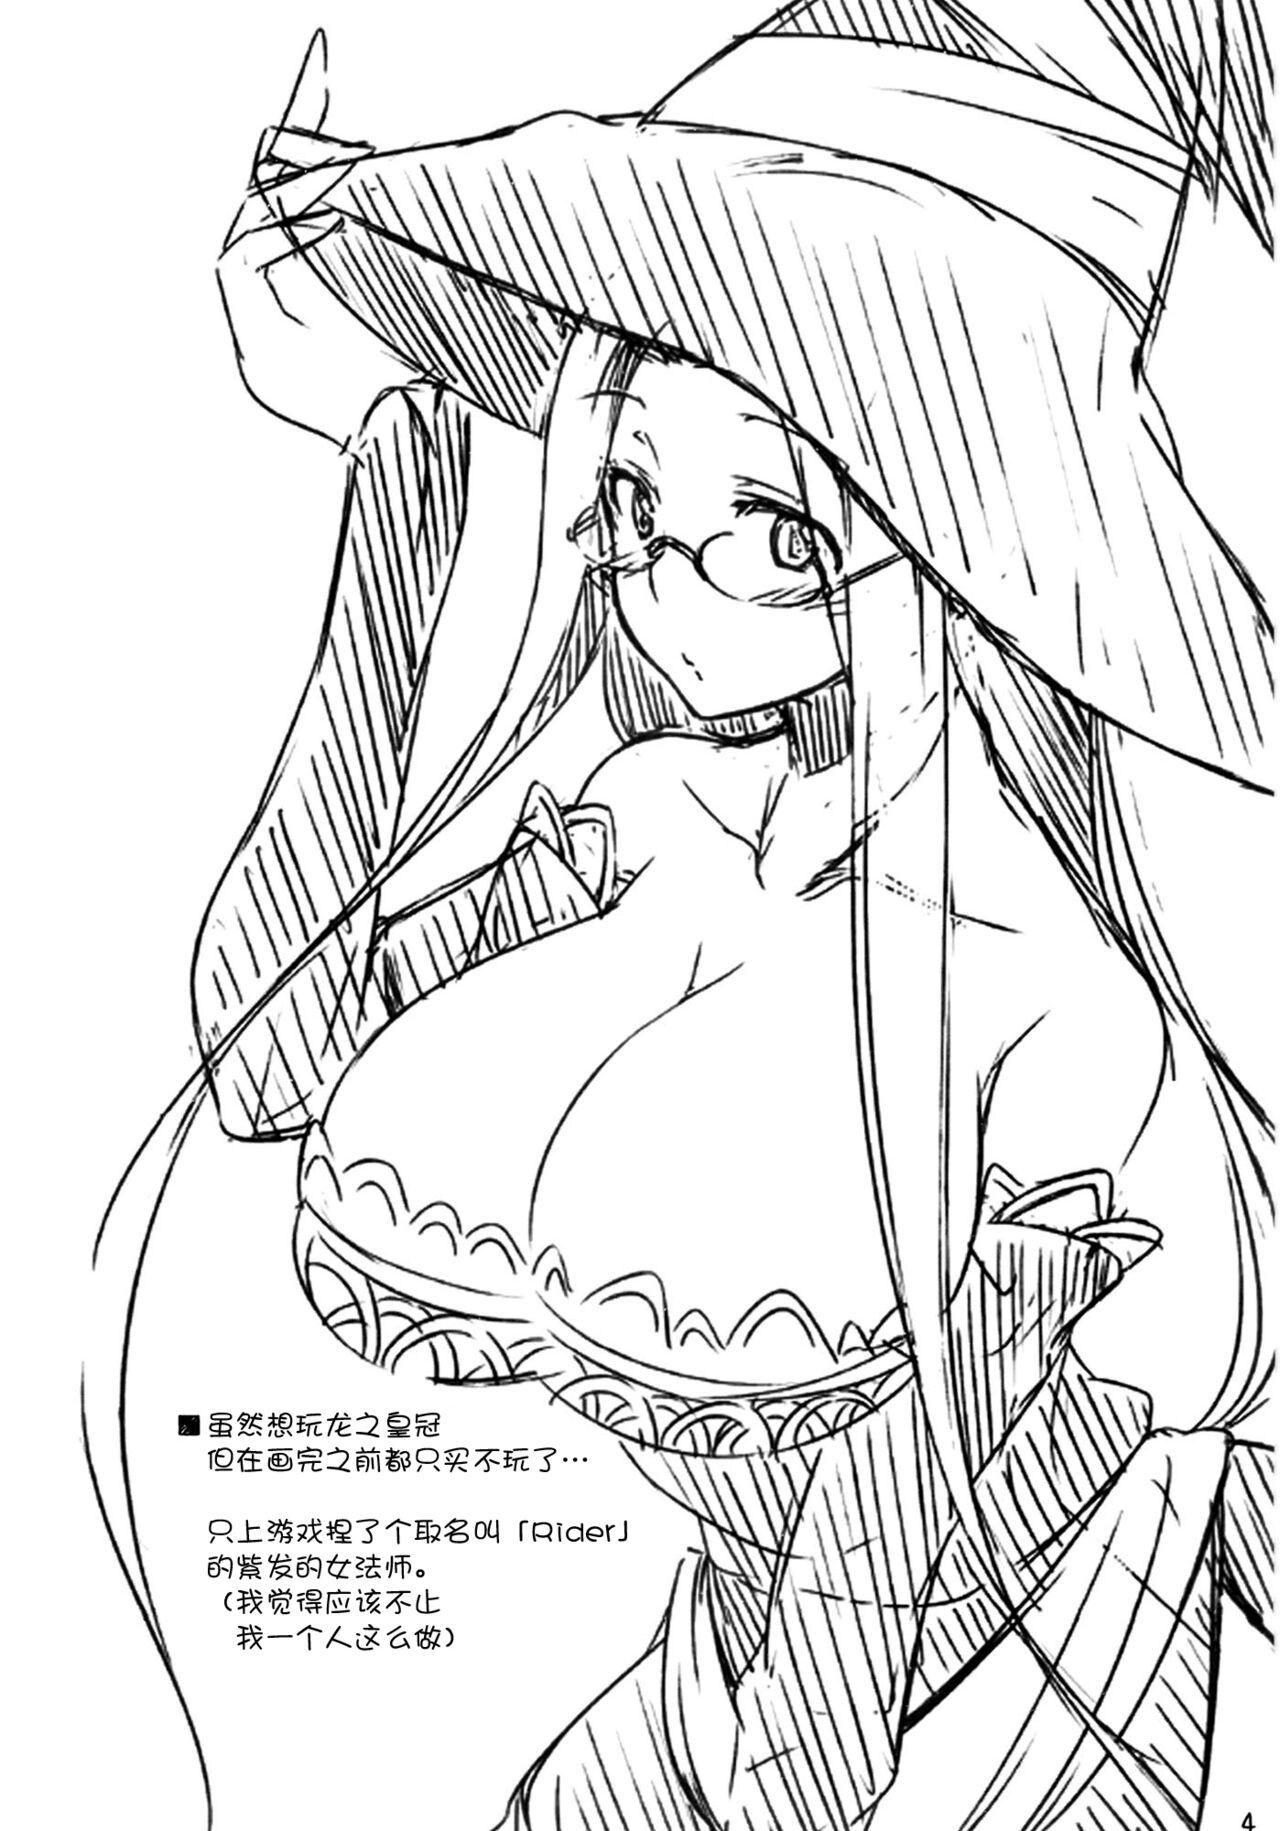 Mommy R8 - Fate stay night Fate hollow ataraxia Tranny Sex - Page 4